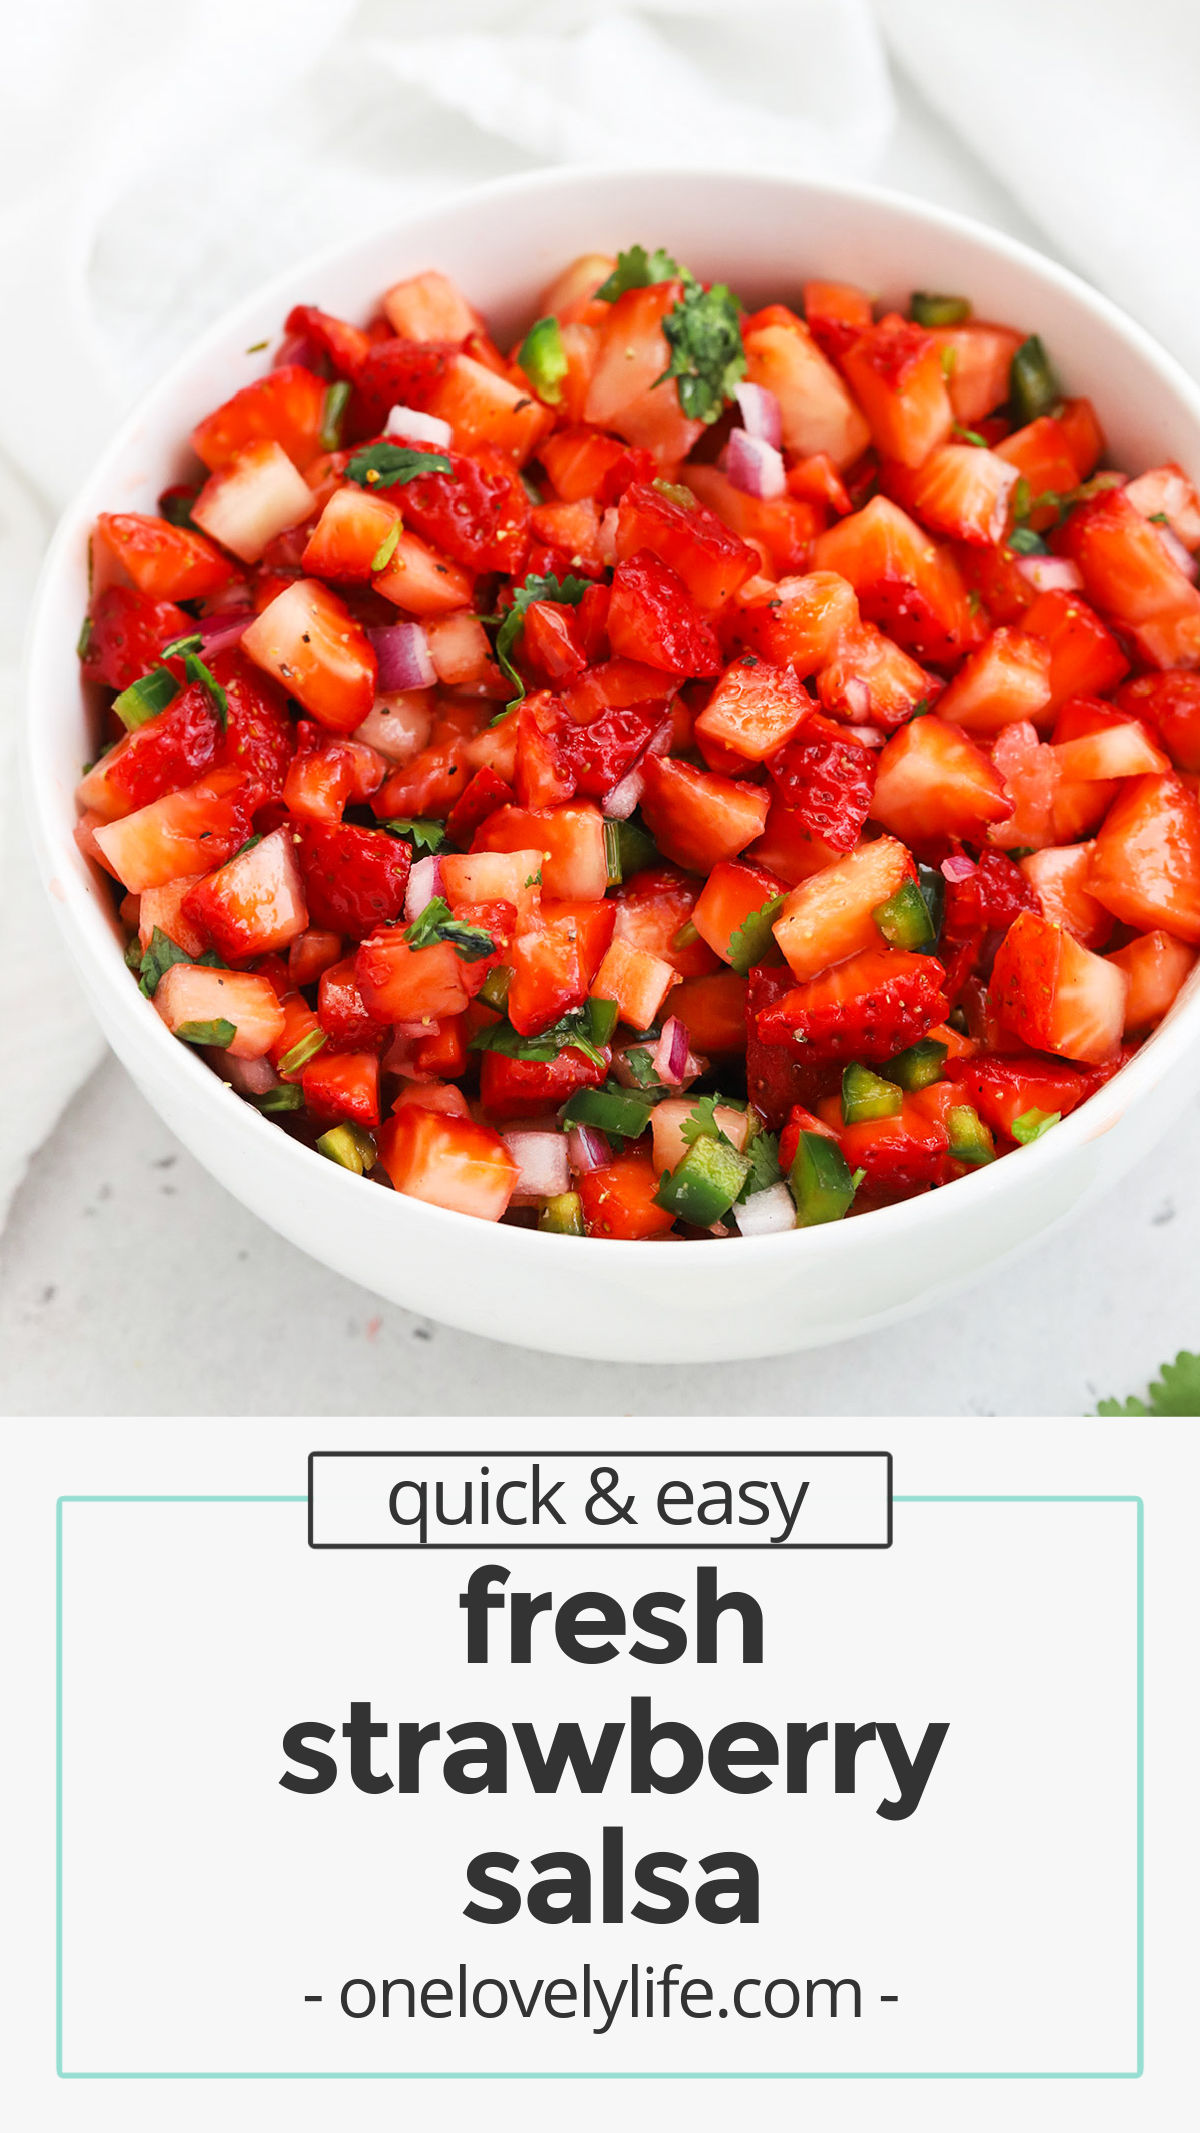 Sweet & Spicy Strawberry Salsa - This easy strawberry salsa recipe is such a delightful change of pace. It's a gorgeous blend of sweet & savory. You'll love it! // fruit salsa recipe // fresh strawberry salsa // vegan salsa // homemade salsa // sweet salsa // summer appetizer // spring appetizer // bbq side dish // potluck recipe // gluten-free // vegan // paleo // whole30 // Tex-Mex // chip dip // tortilla chip dip // chips and salsa // strawberry recipes // healthy salsa // healthy recipe